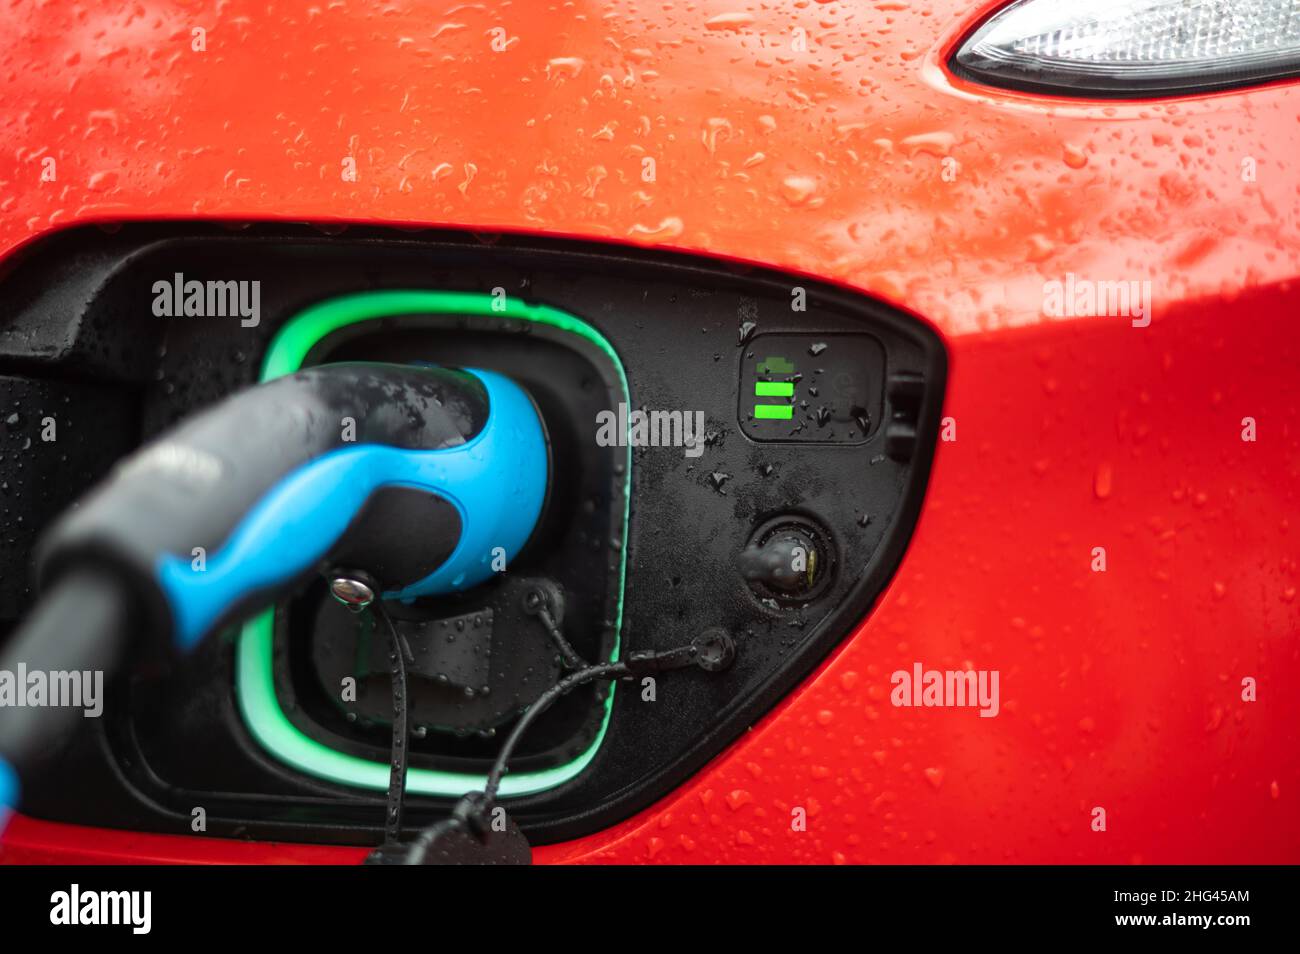 charging red electric car on a rainy day Stock Photo Alamy